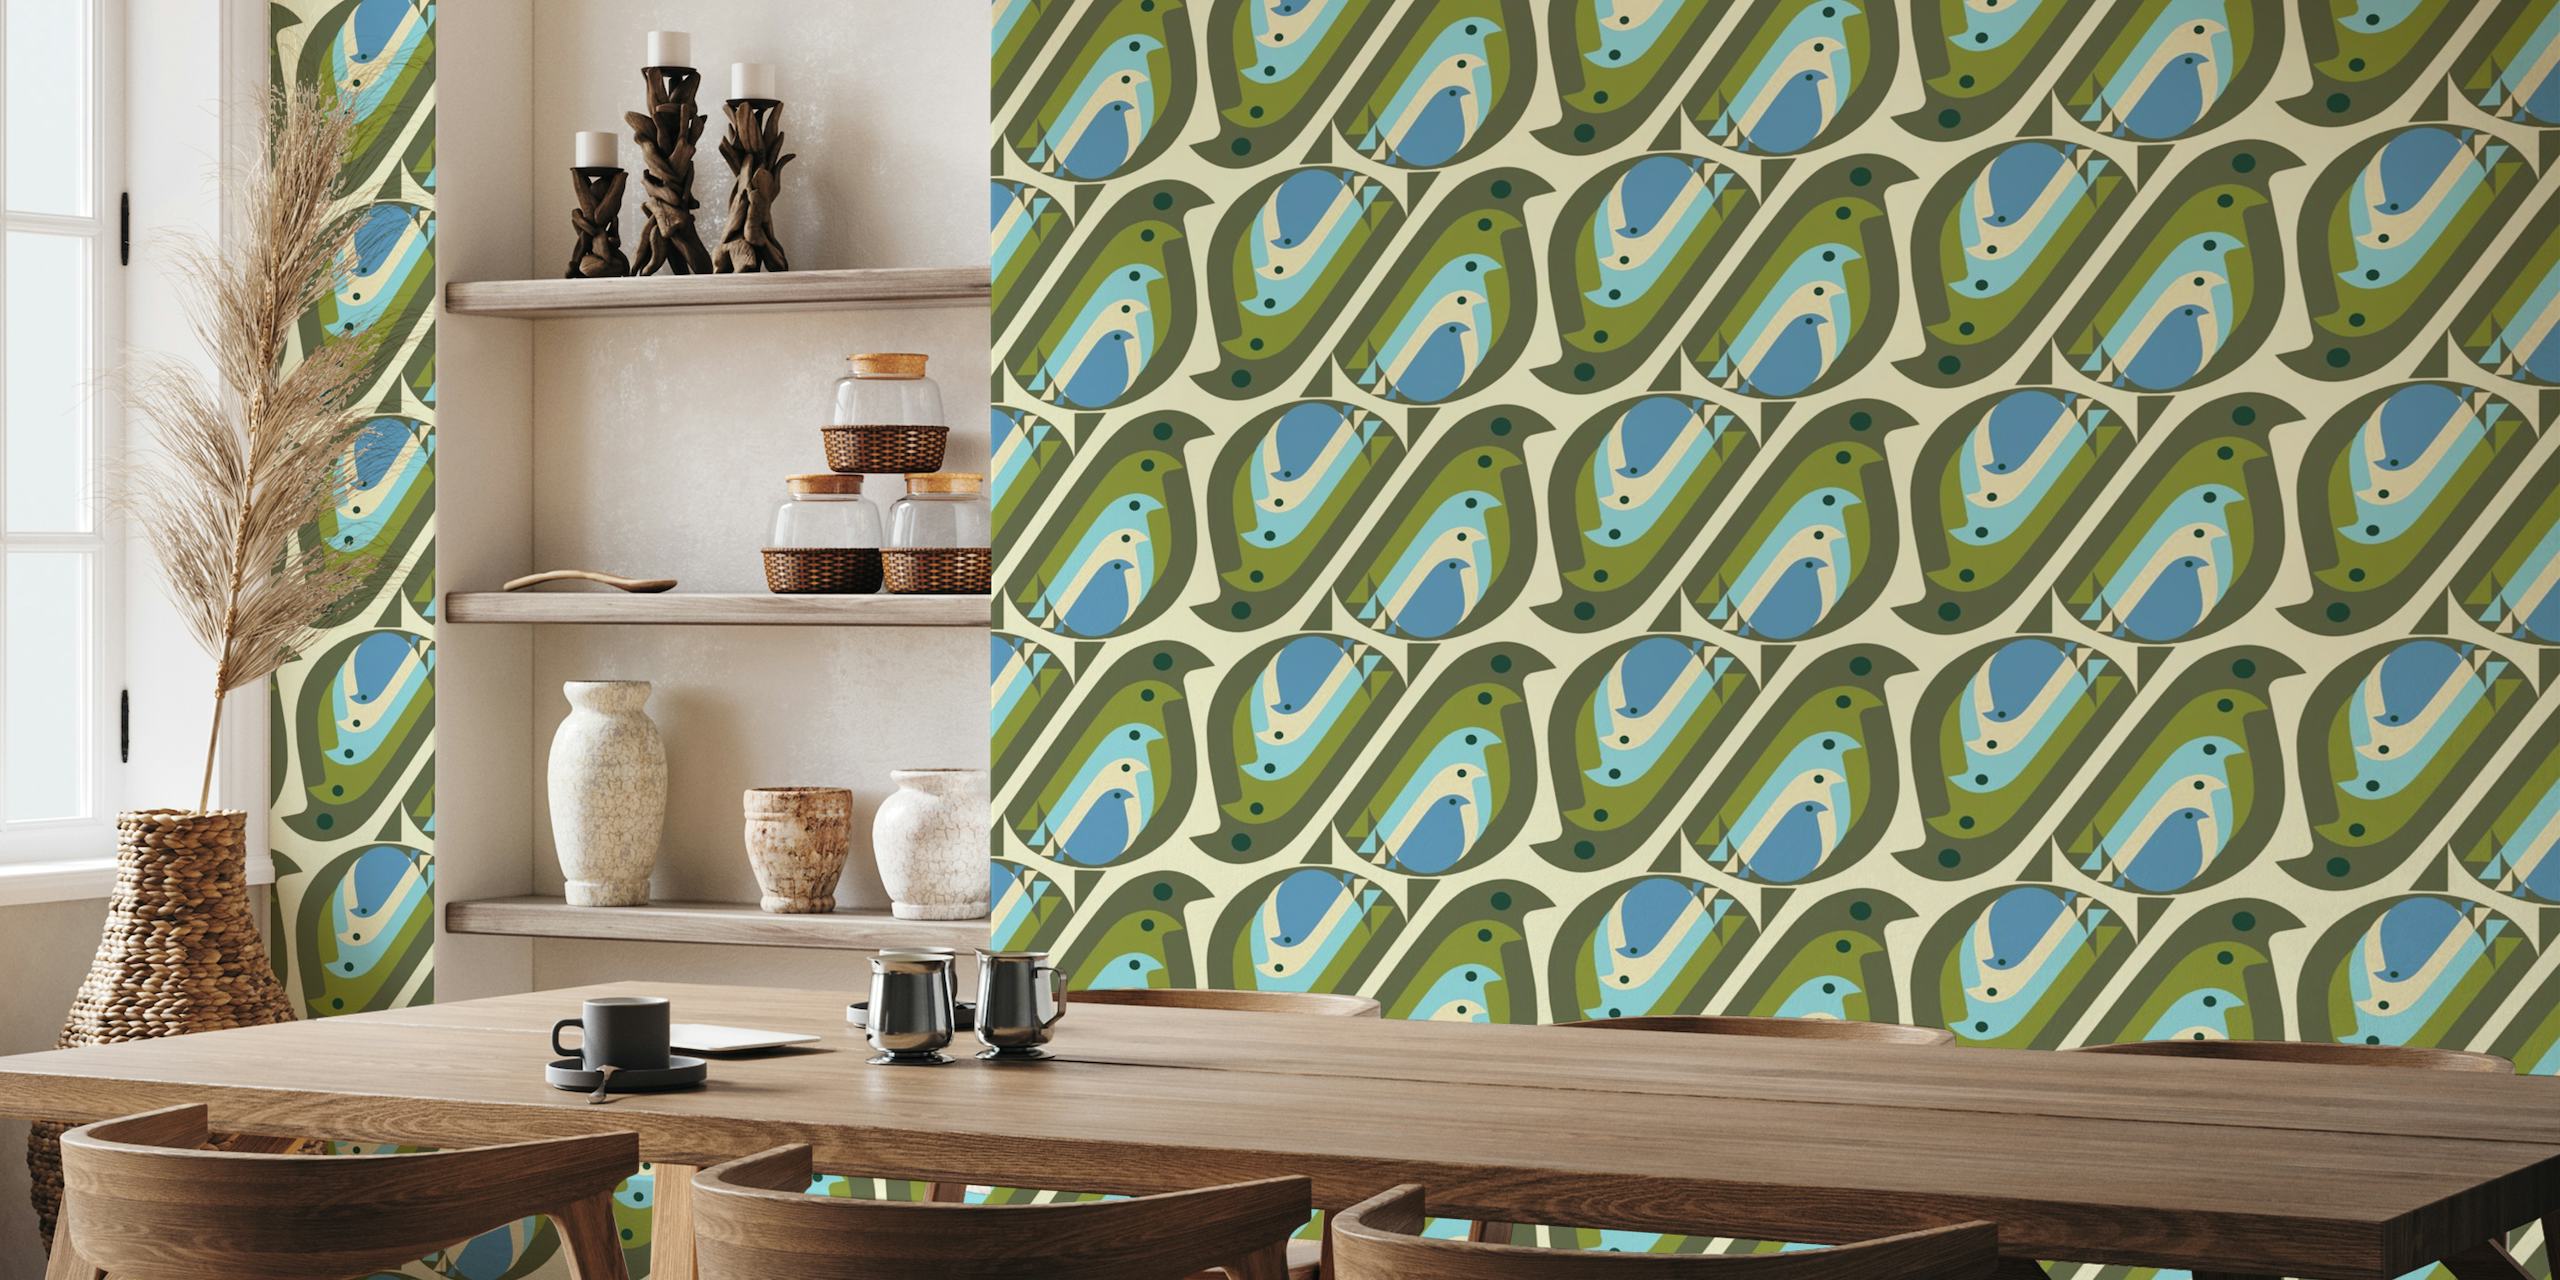 Retro Bird Leafs wall mural with stylized bird and leaf patterns